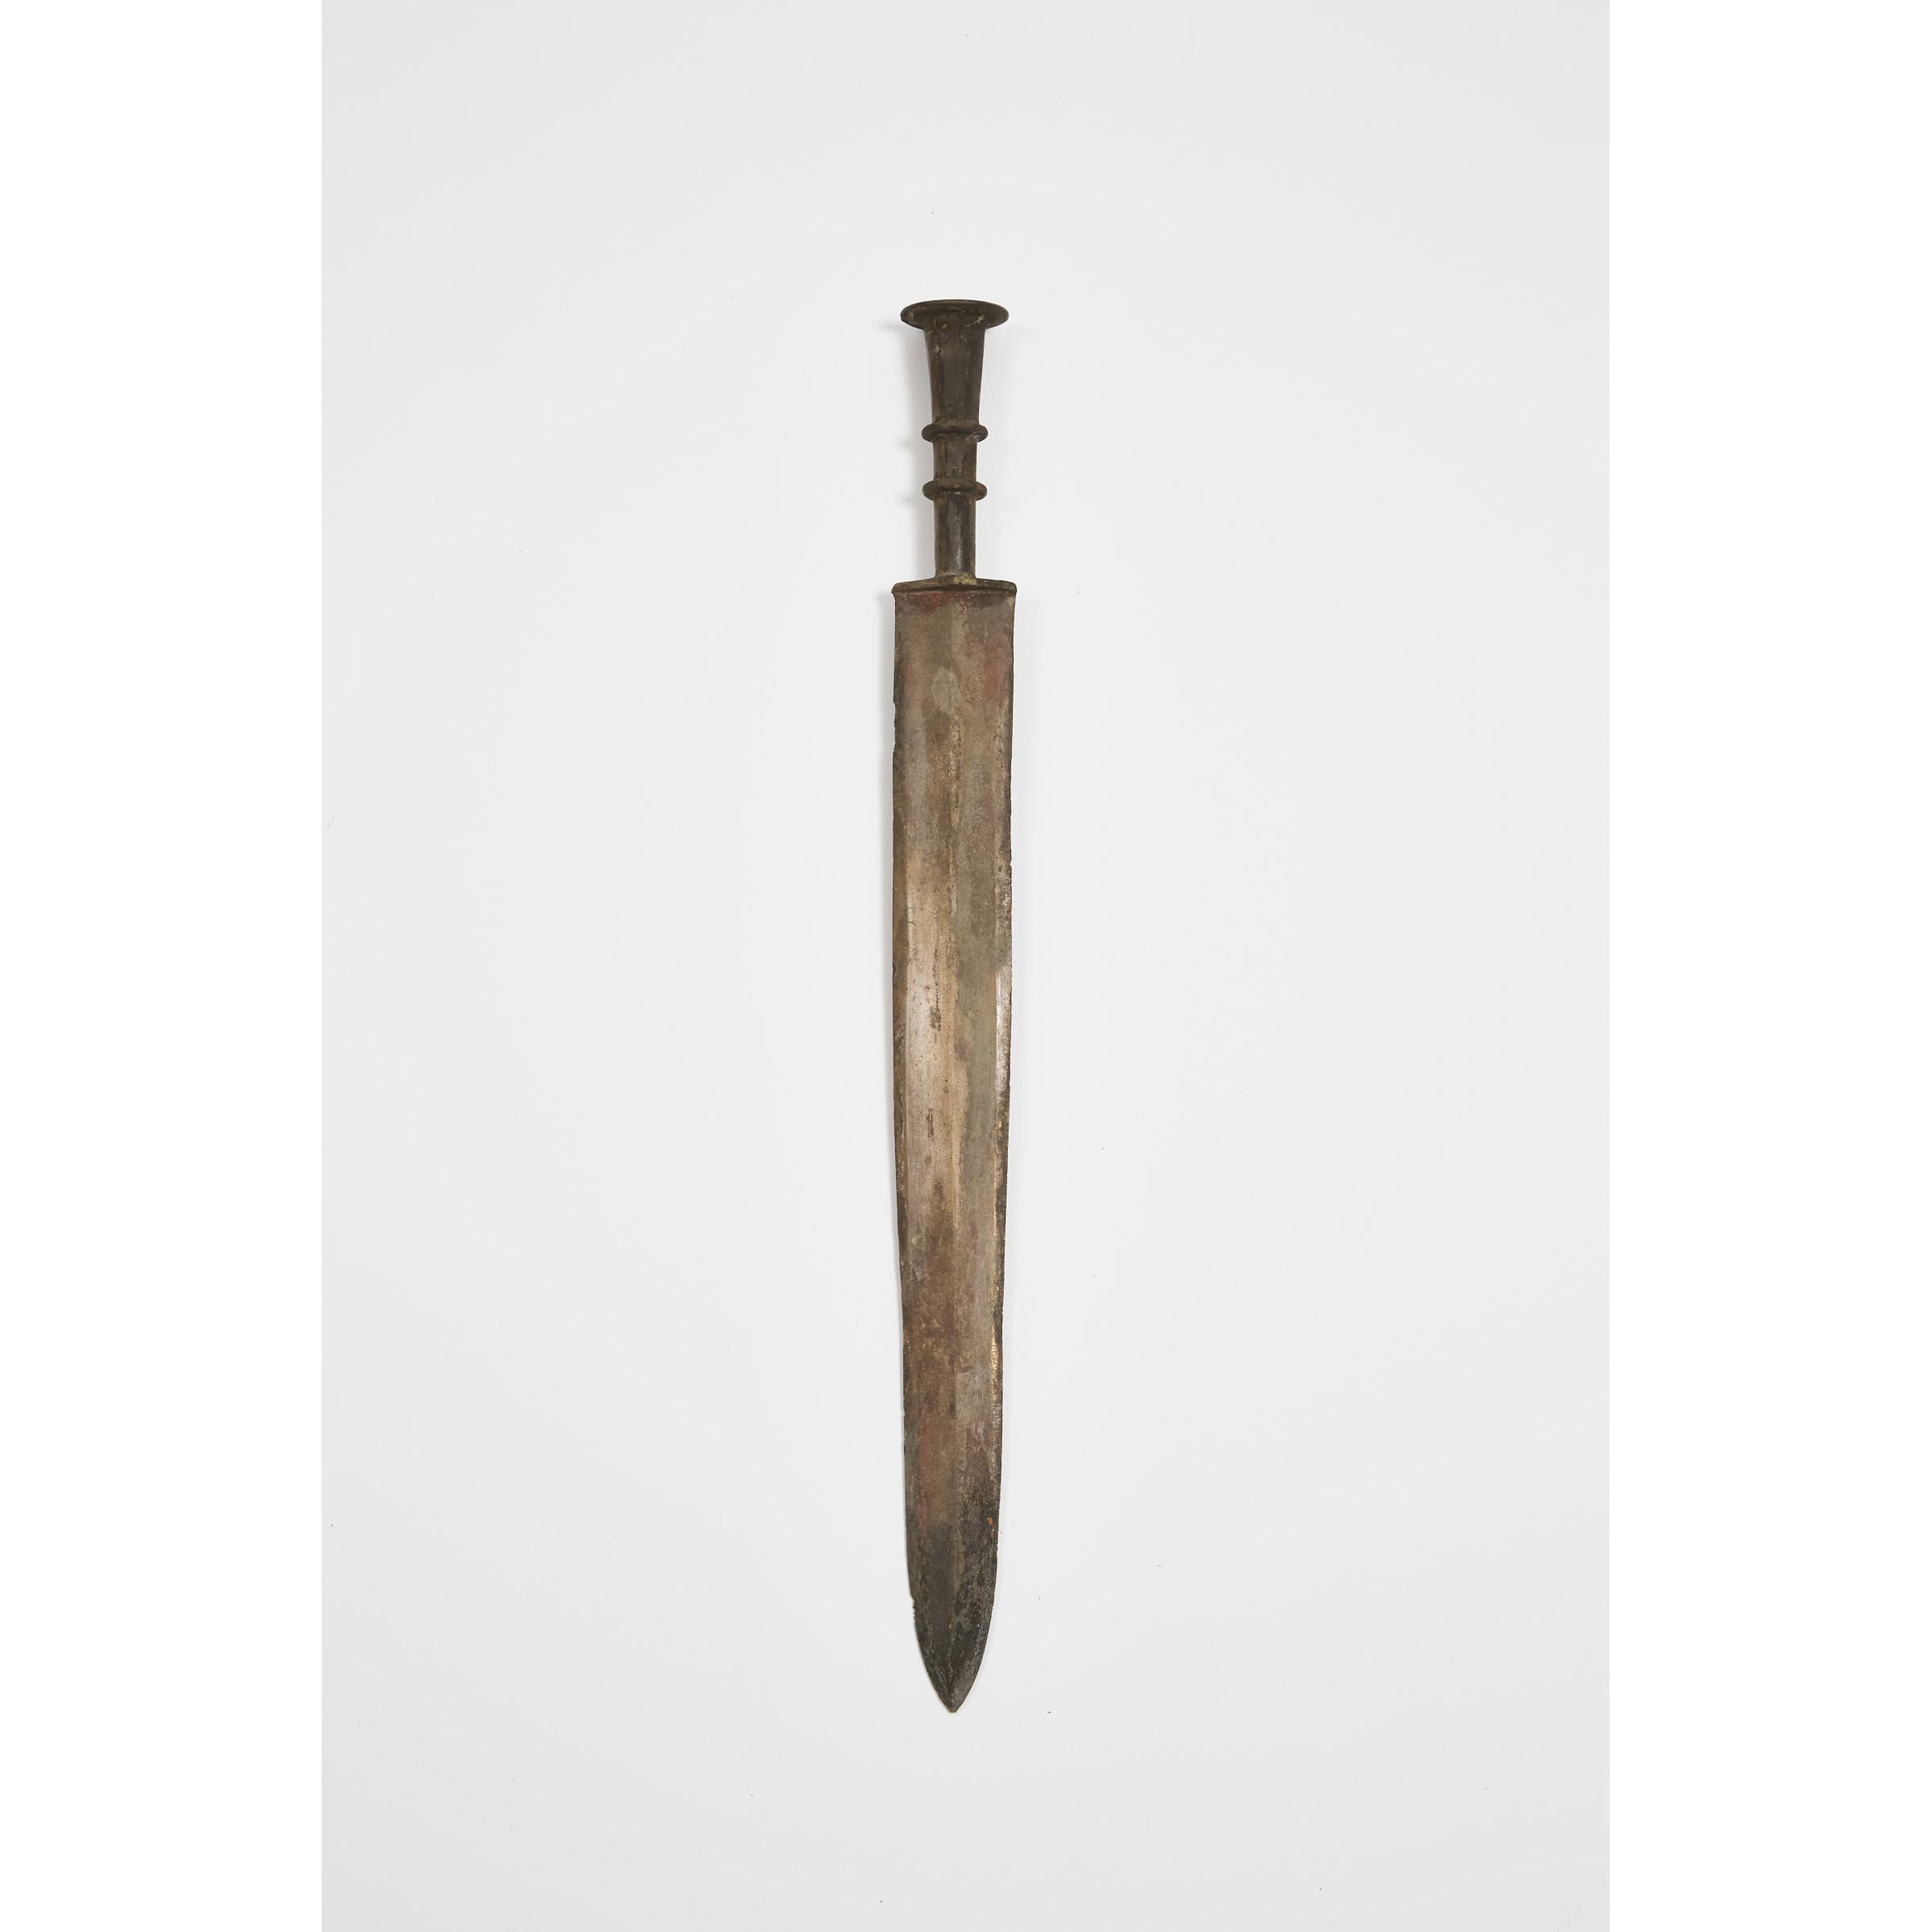 A Bronze Sword, Warring States Period (475-221 BC)